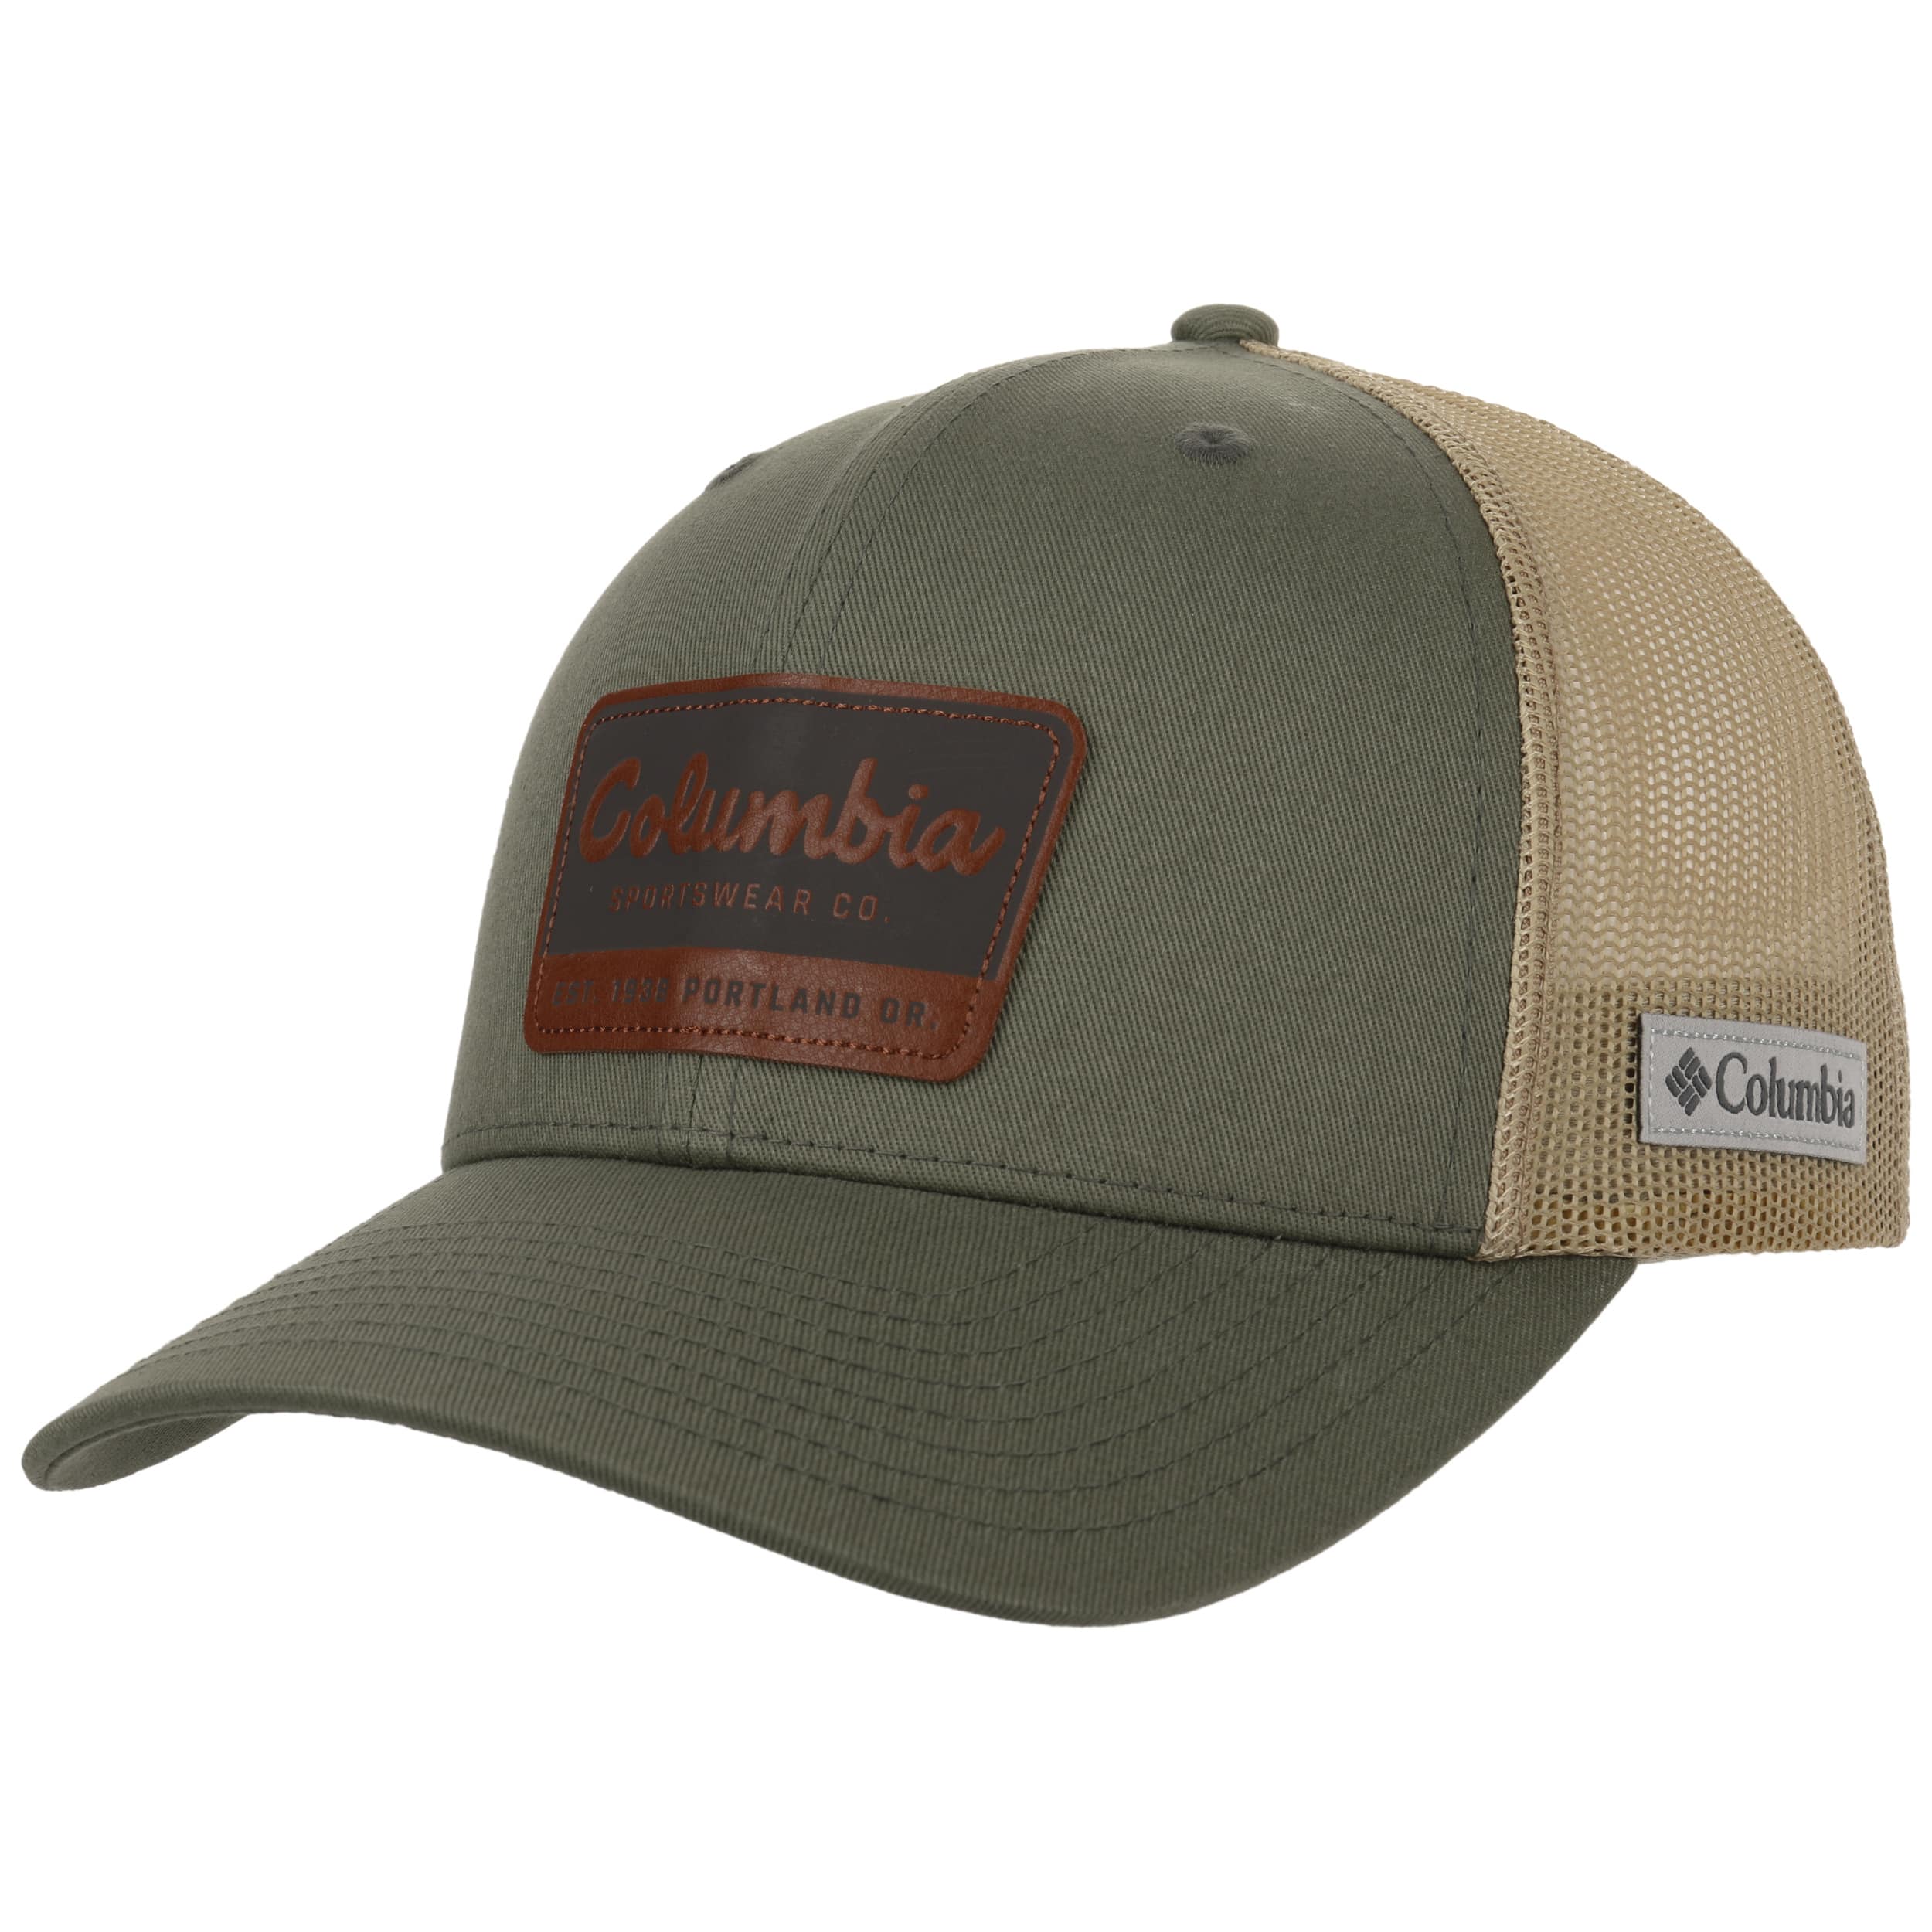 Rugged Outdoor Cap by Columbia - 33,95 £